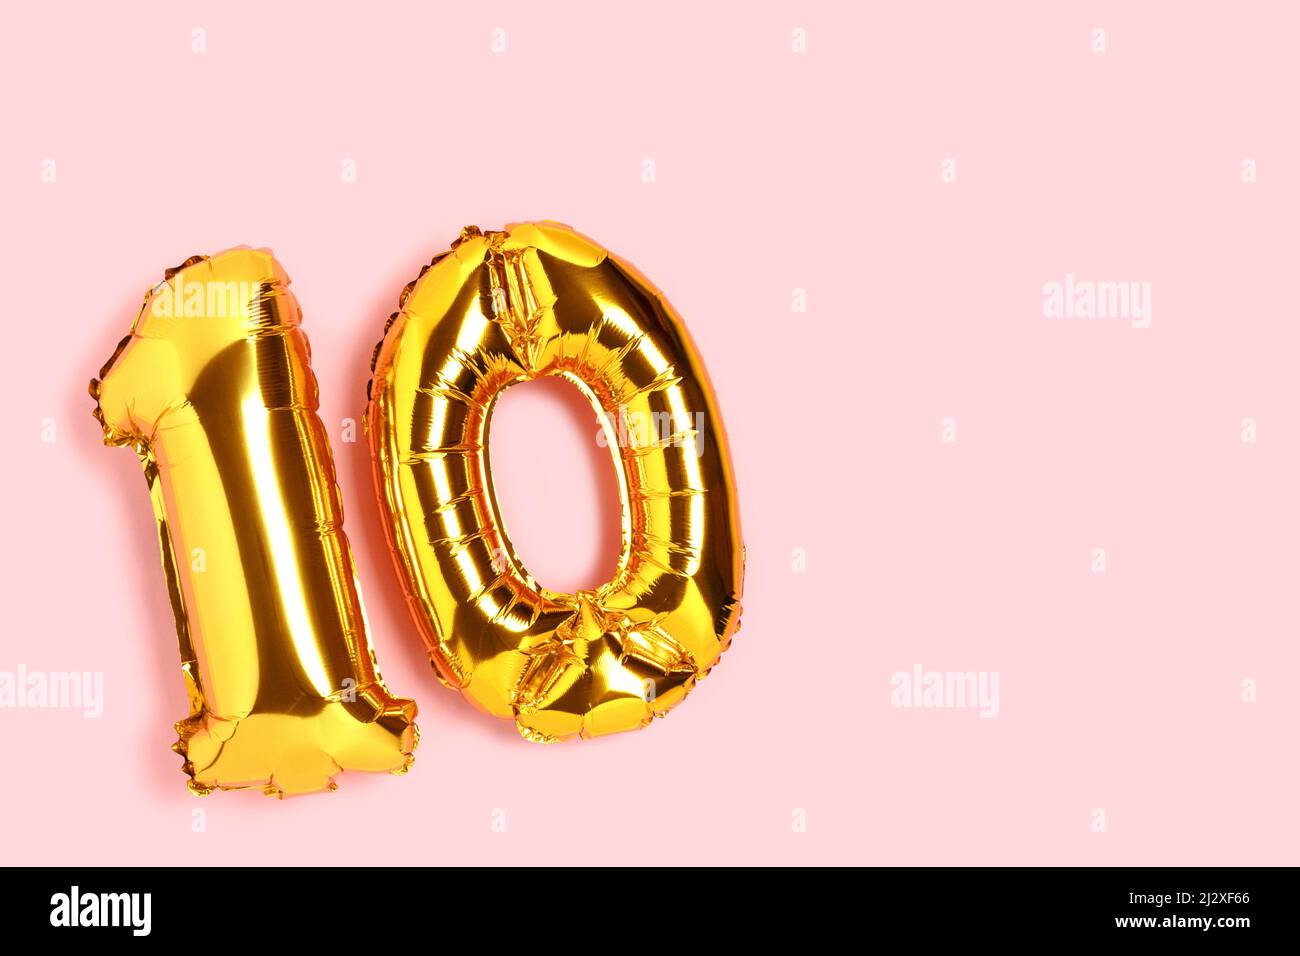 Number 10 golden balloons with copy space. Ten years anniversary celebration concept on a pink background. Stock Photo